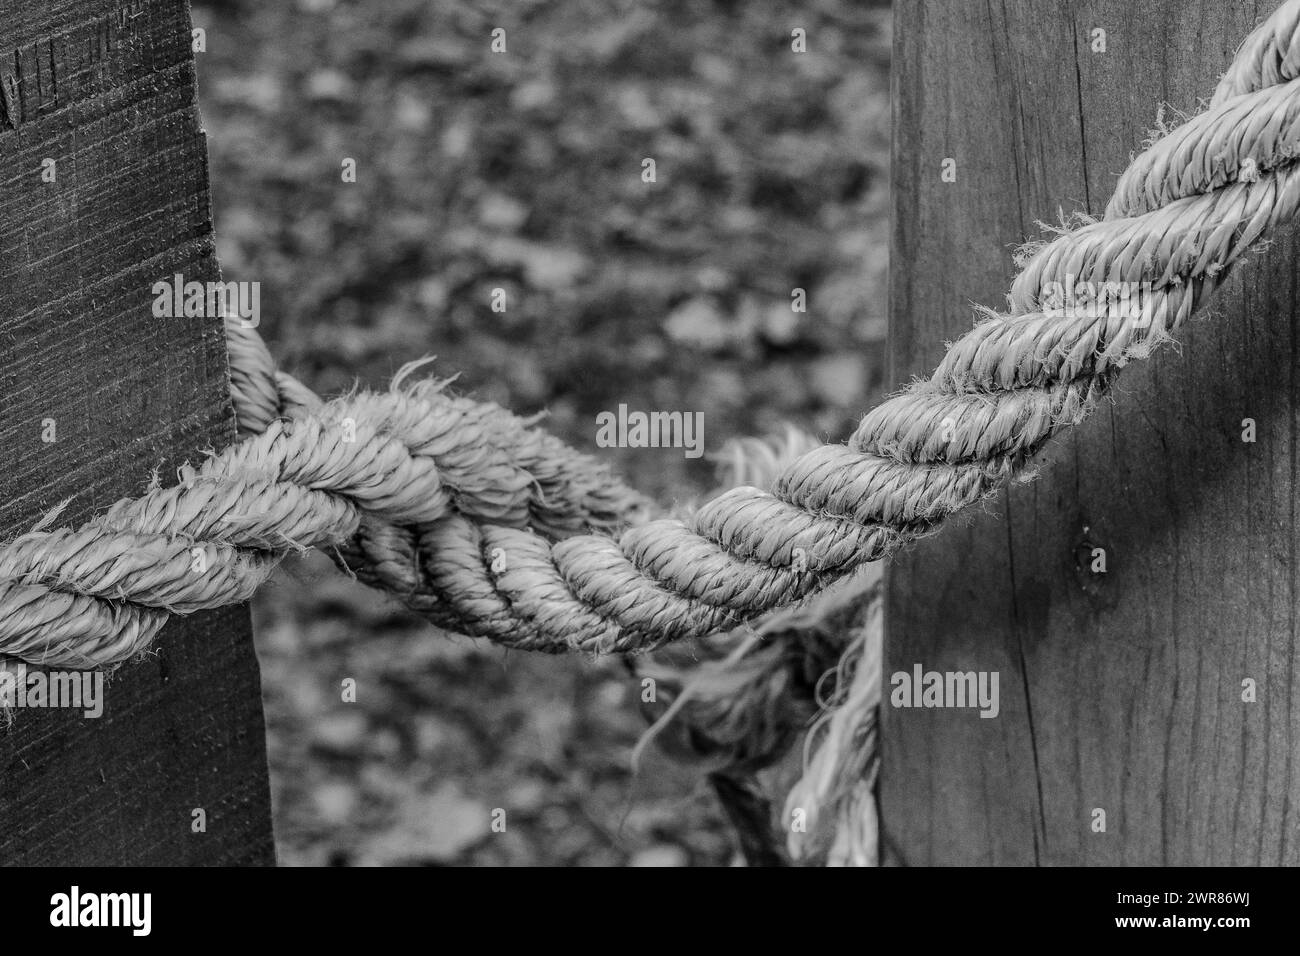 Knotted rope holding a country gate closed. Concepts, closed, barred, security, safety, prevention, mental issues, textures. Stock Photo